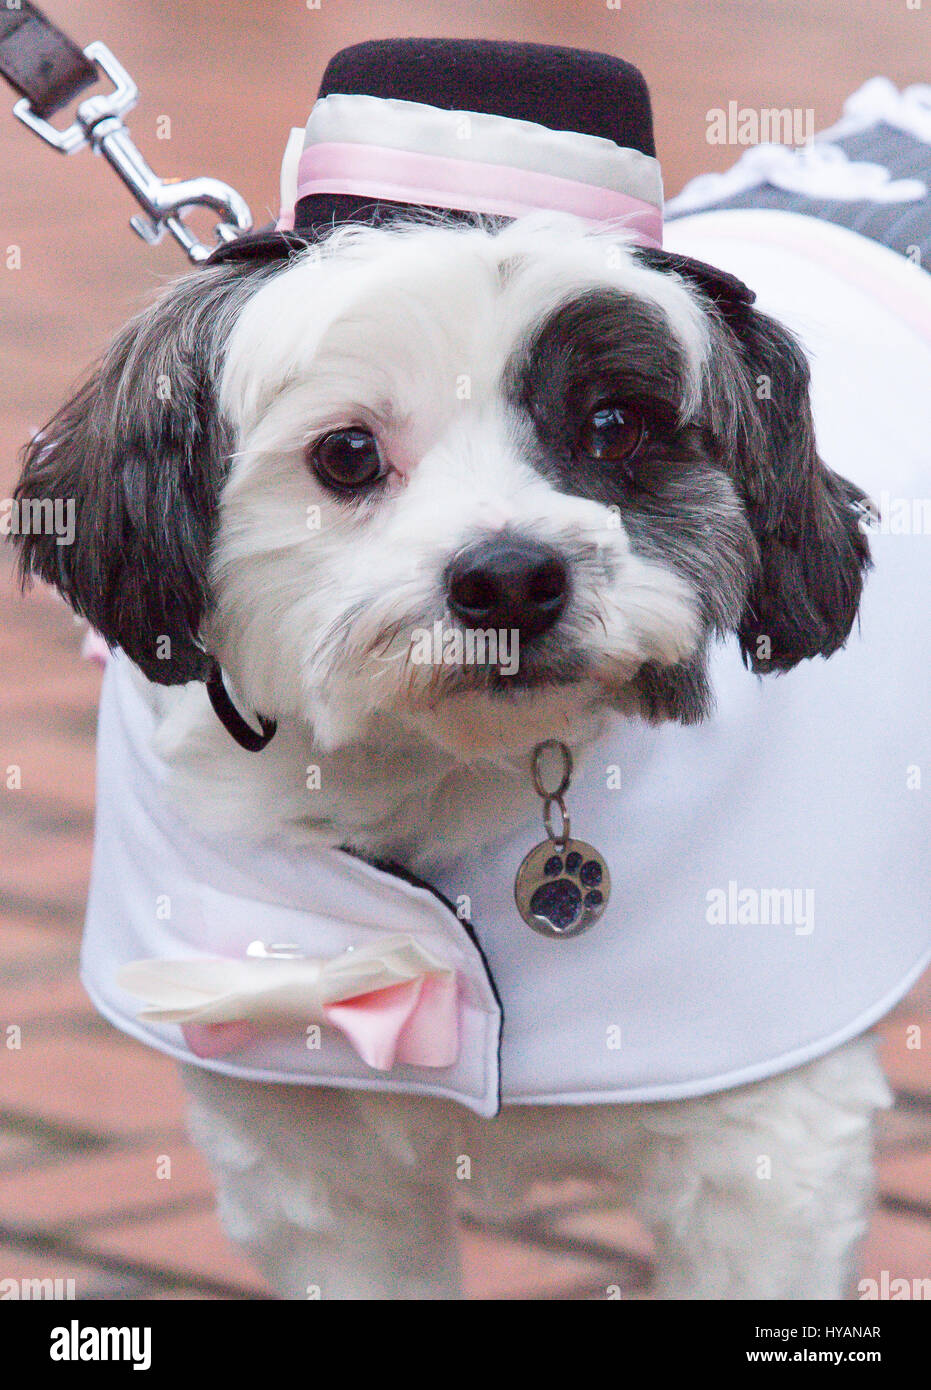 Brindley Place, Birmingham: Rufus looking exciting before the wedding. A DOGGY wedding could be the most whirlwind yet as former lonely-hearts Rufus and Lady get hitched after dating for just THREE-WEEKS. Pictures show how love-up Bichon Frise Lady (3) and Cavachon Rufus (2) were walked up the aisle by their owners and were married to the delight of 60 human and canine wedding guests. Despite the speed of their relationship the setting couldn’t be more romantic – with the UK’s only pet registrar Ann Clark (57) presiding over the pooch-wedding on a bandstand in Birmingham’s Brindley Place. The  Stock Photo